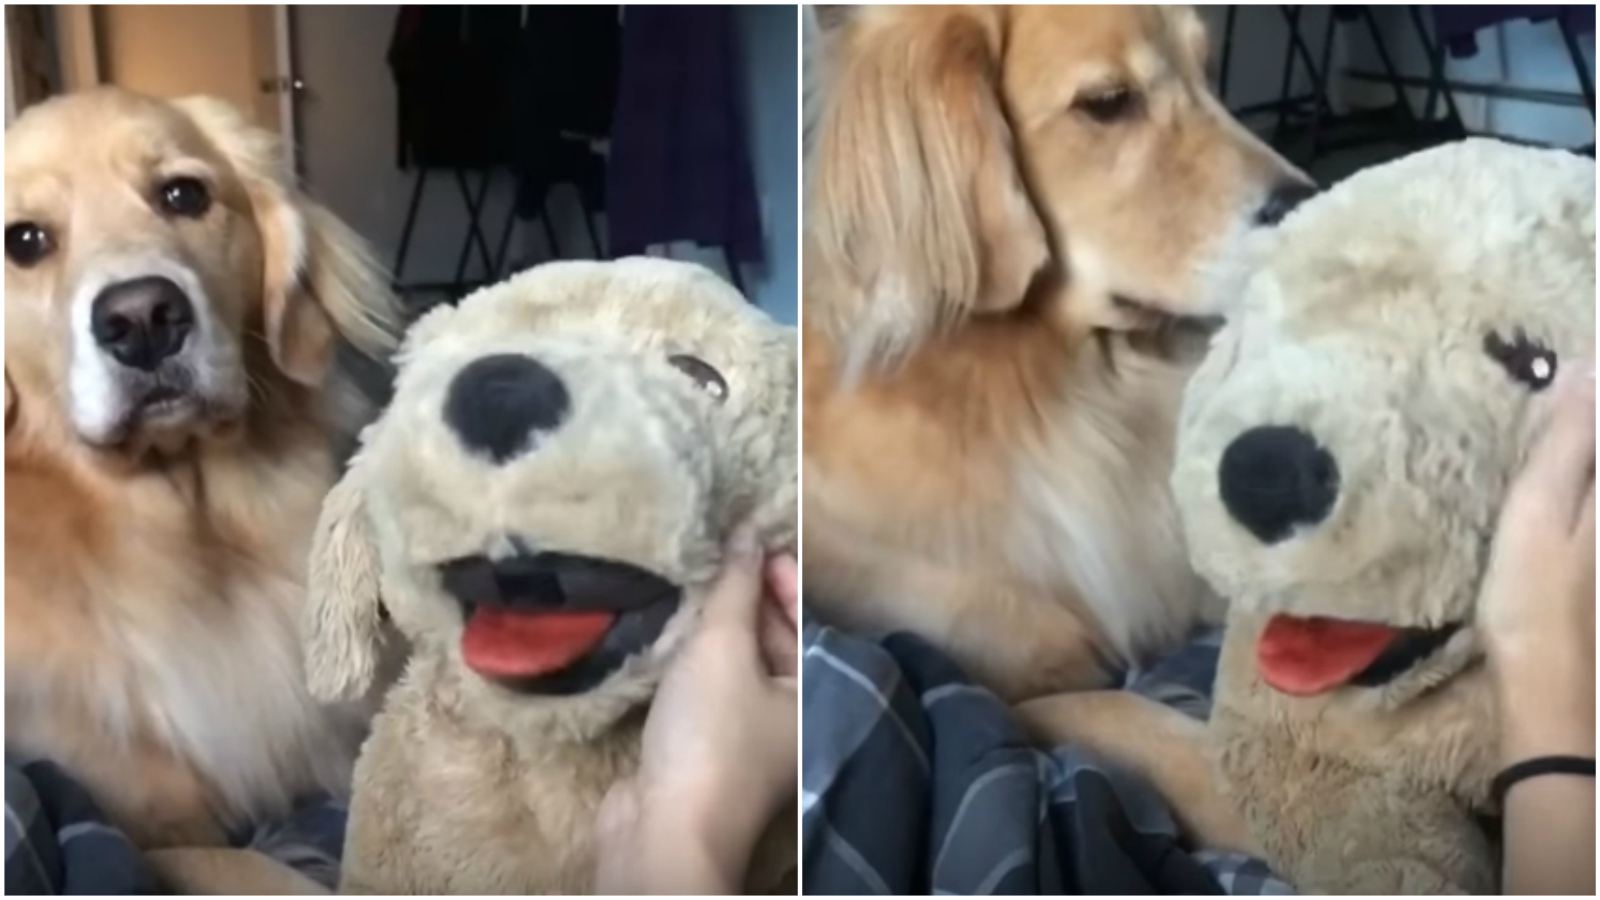 Adorable Golden Retriever Has A Case of Jealously When Her Human Pets Stuffed Animal